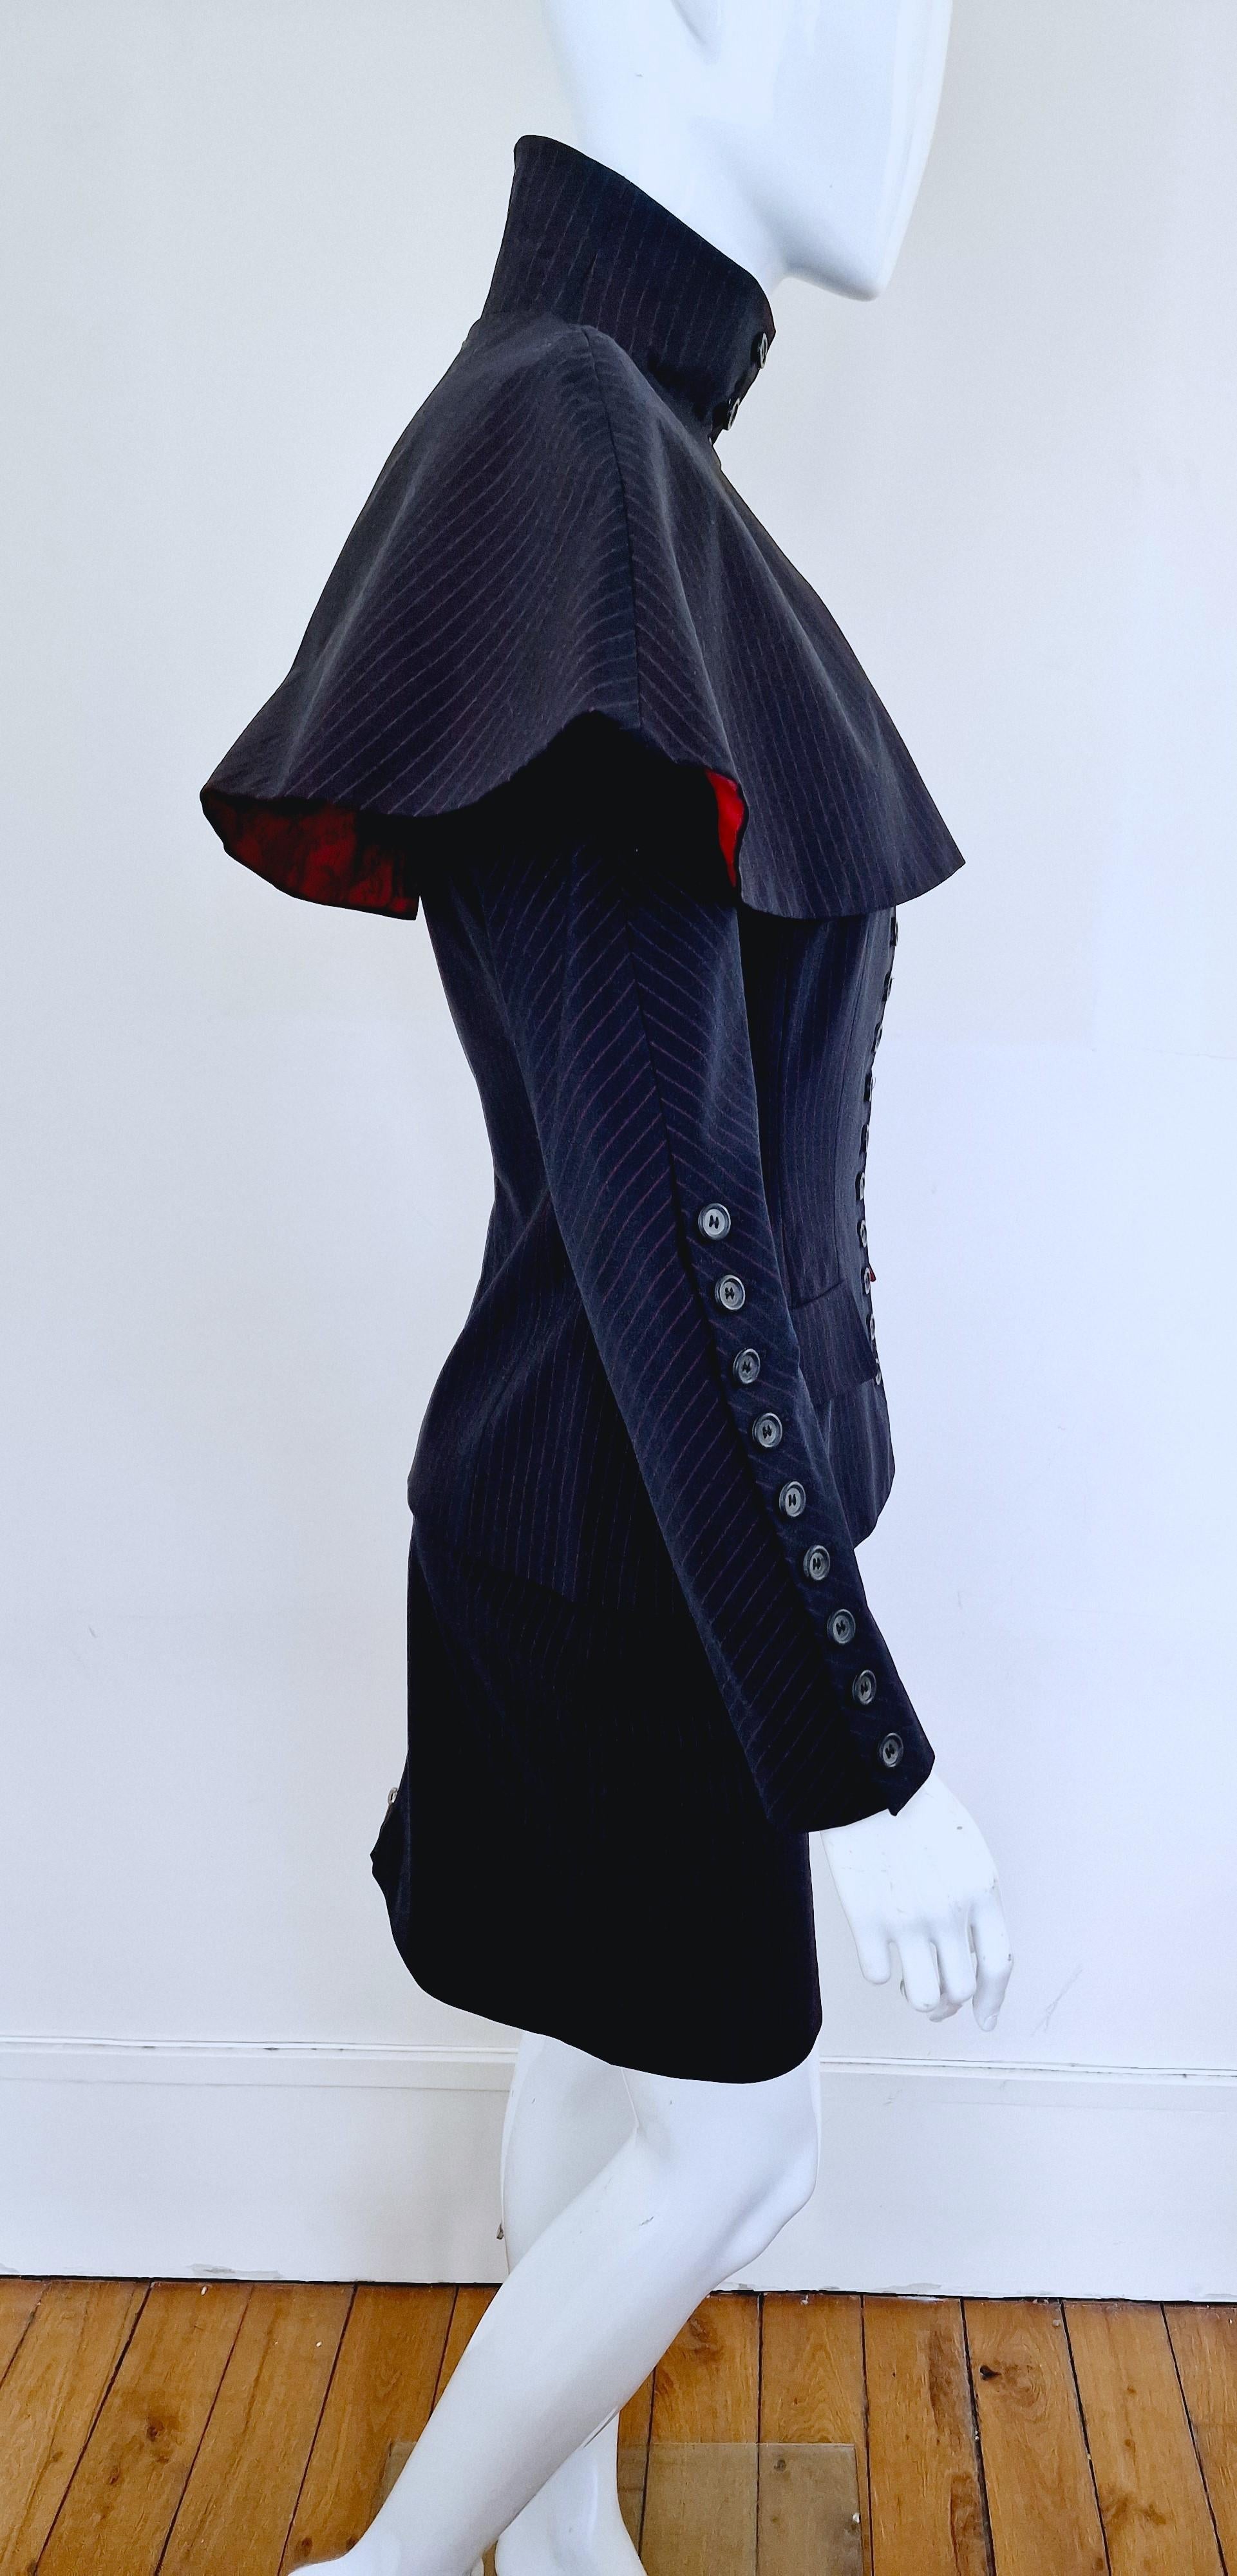 Early Alexander McQueen Joan of Arc Cape 1998 AW98 Runway Collar Dress Suit  For Sale 9